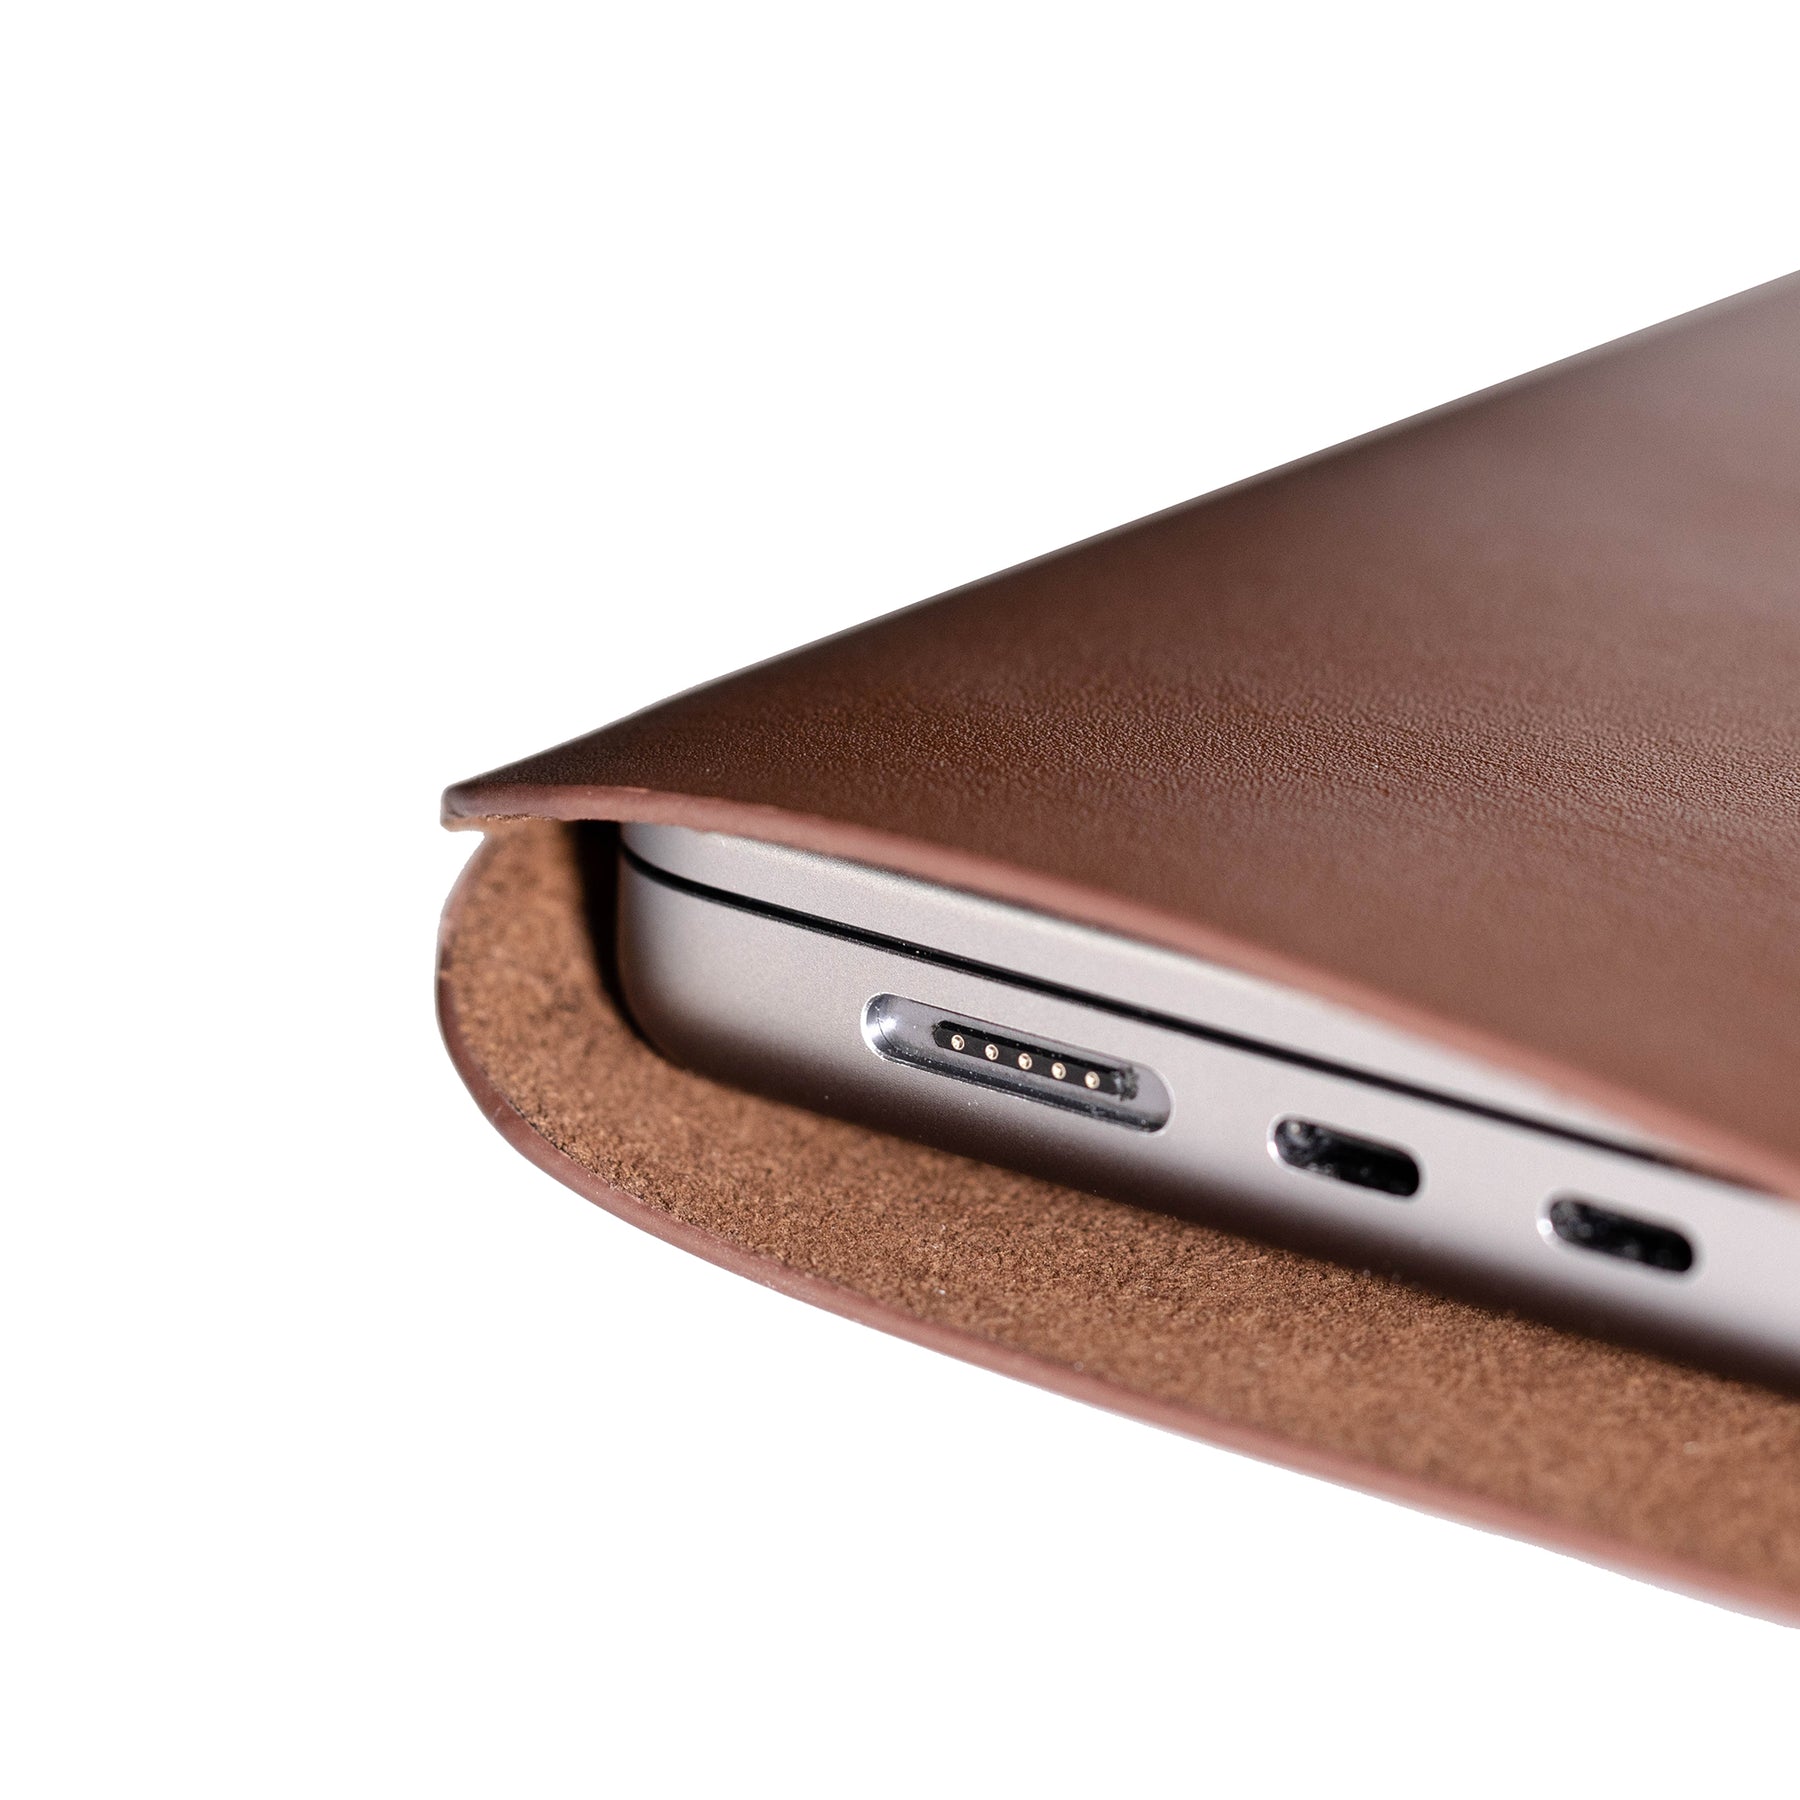 MacBook 14 & 13 Inch Leather Carrying Case - SANDMARC